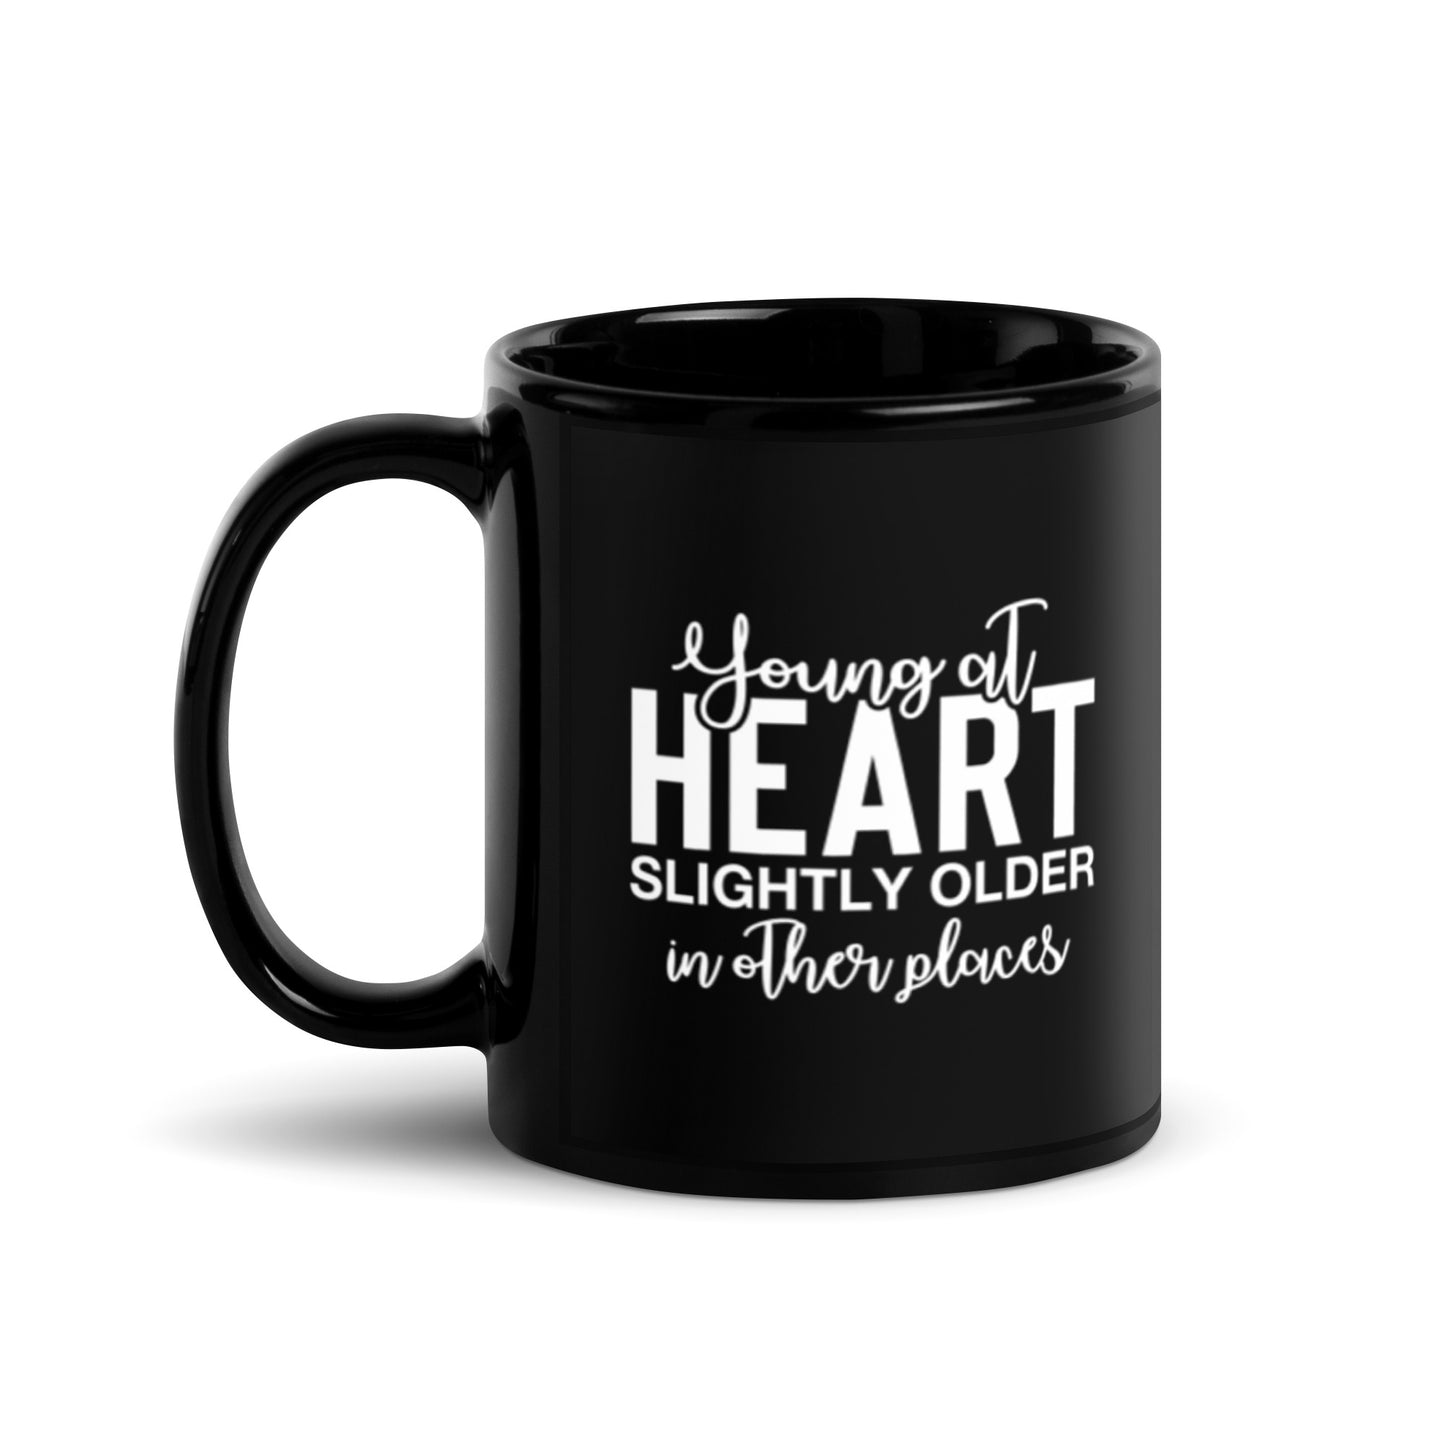 Young at Heart Slightly Older in Other Places Black Glossy Mug